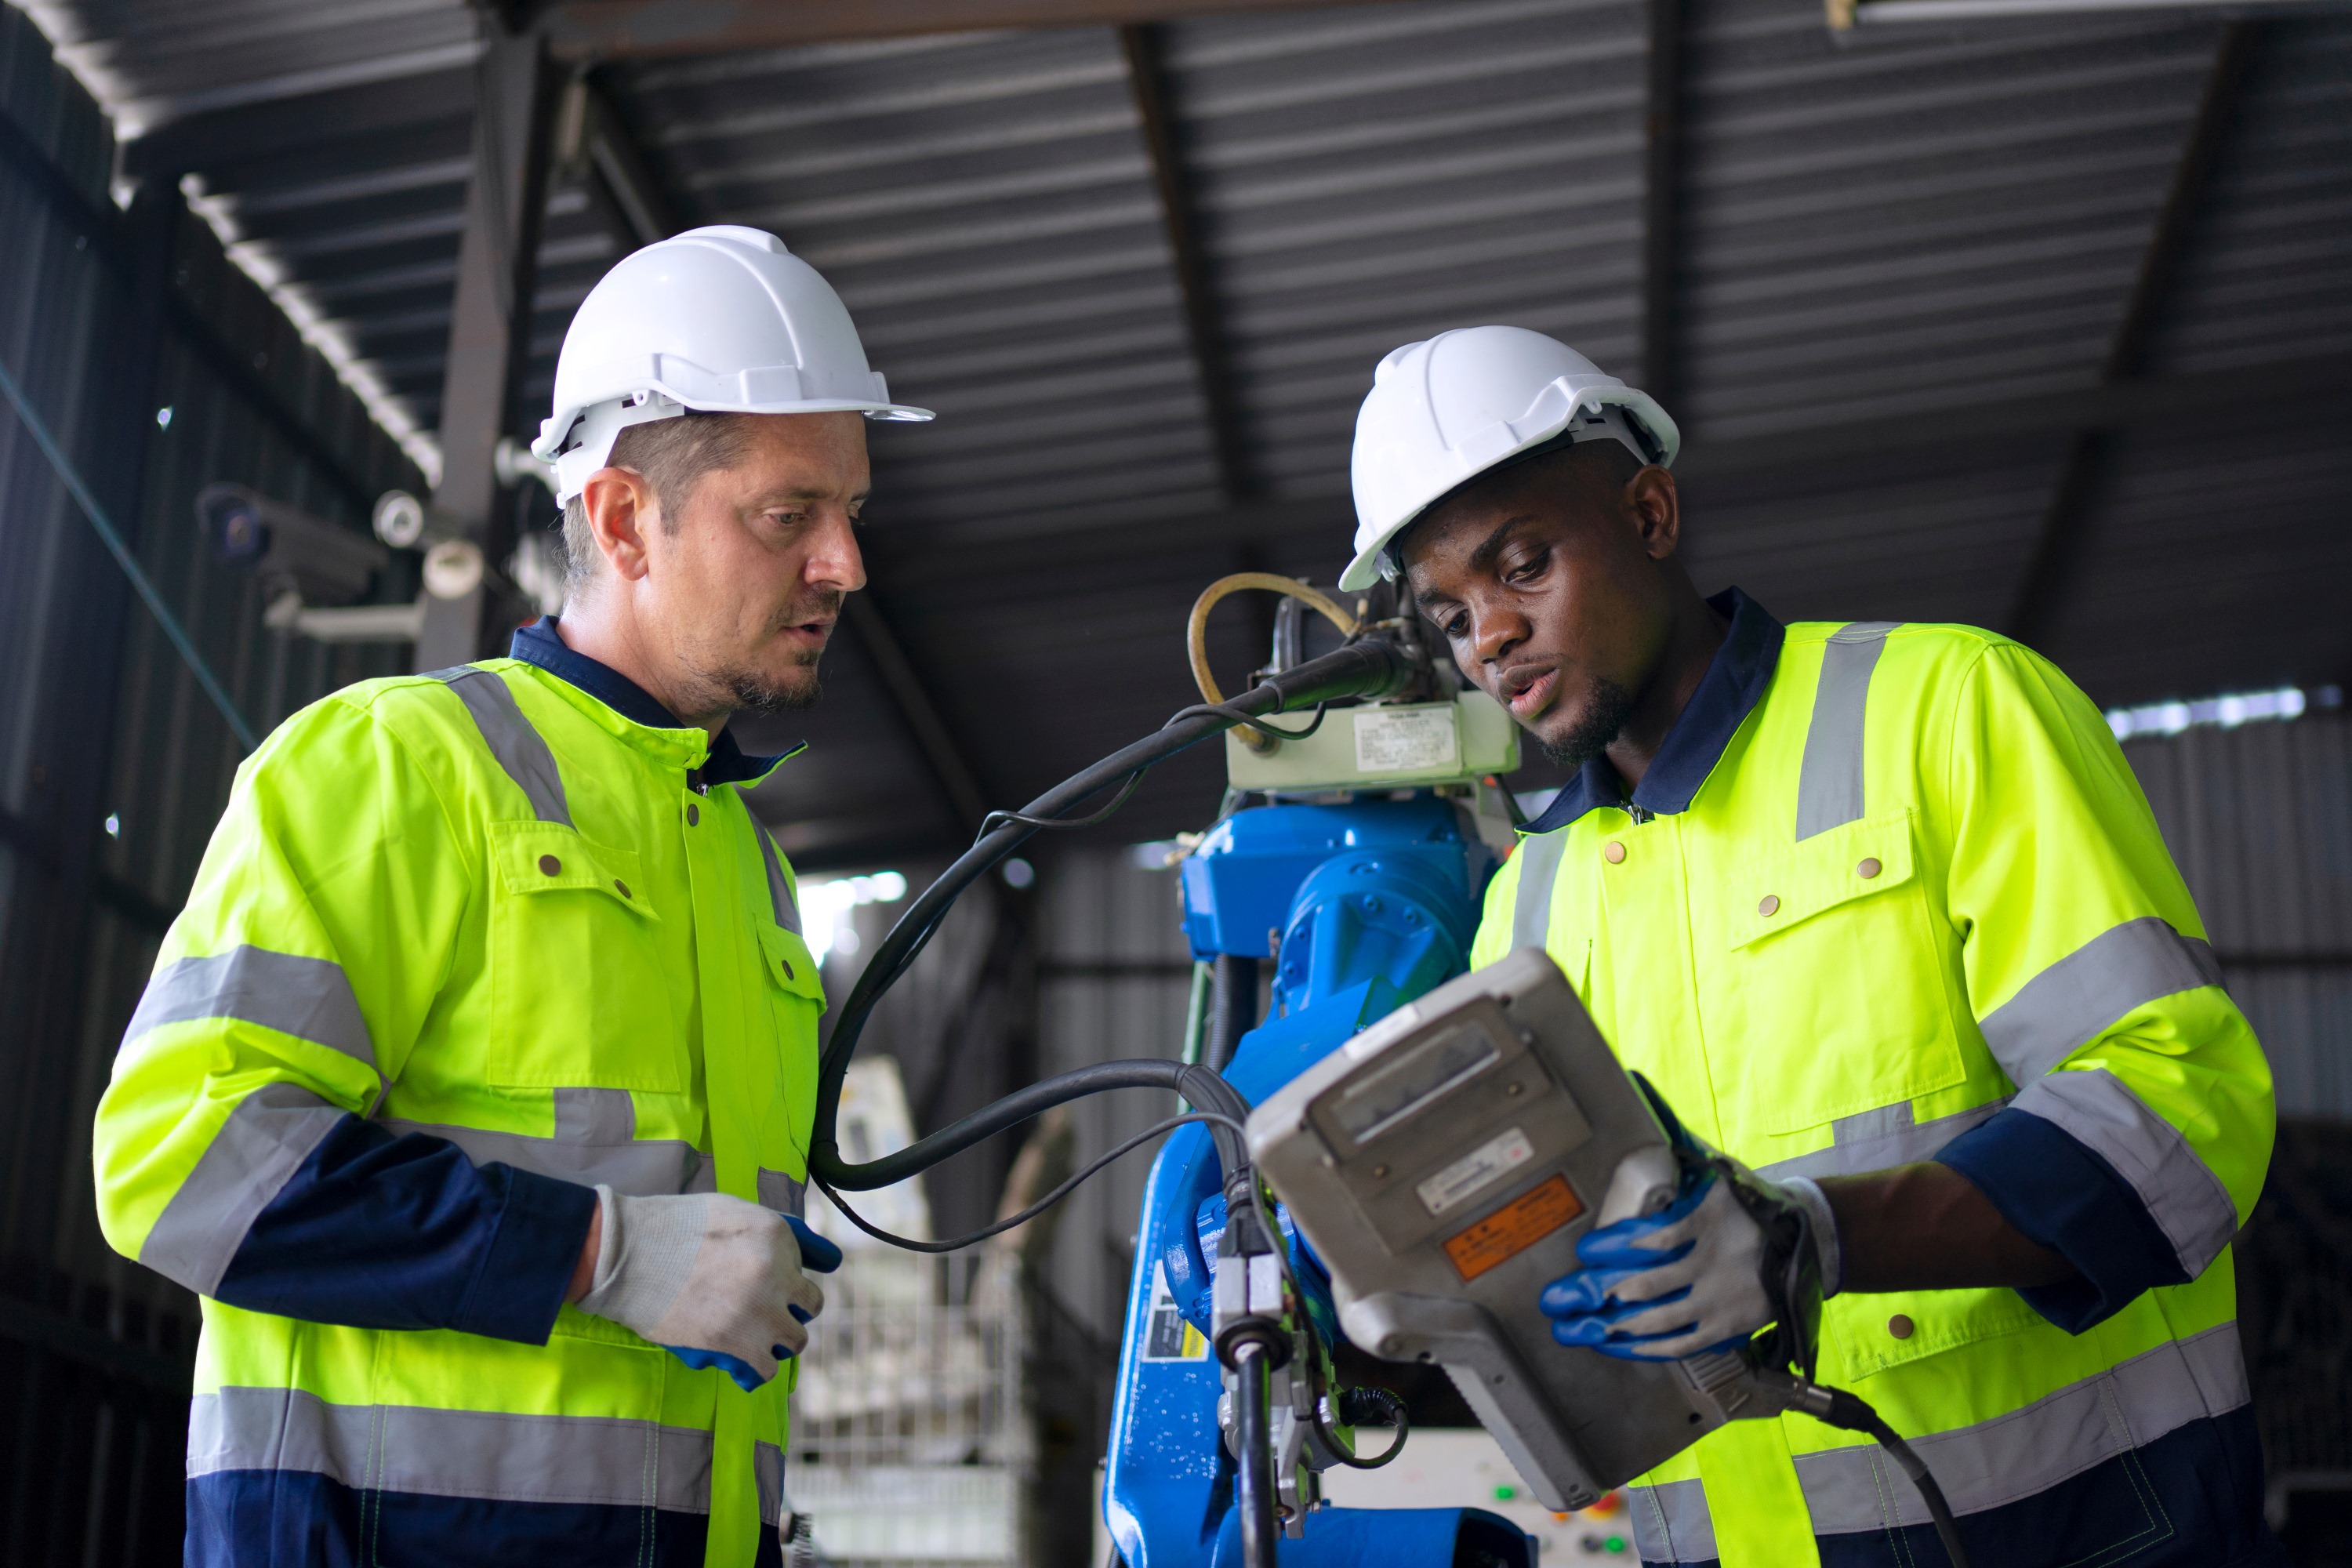 A Black man and a white man wearing high visibility jackets and hard hats work together to maintain an industrial robot. The Black man is holding the robot's teach pendant, and showing it to the white man.